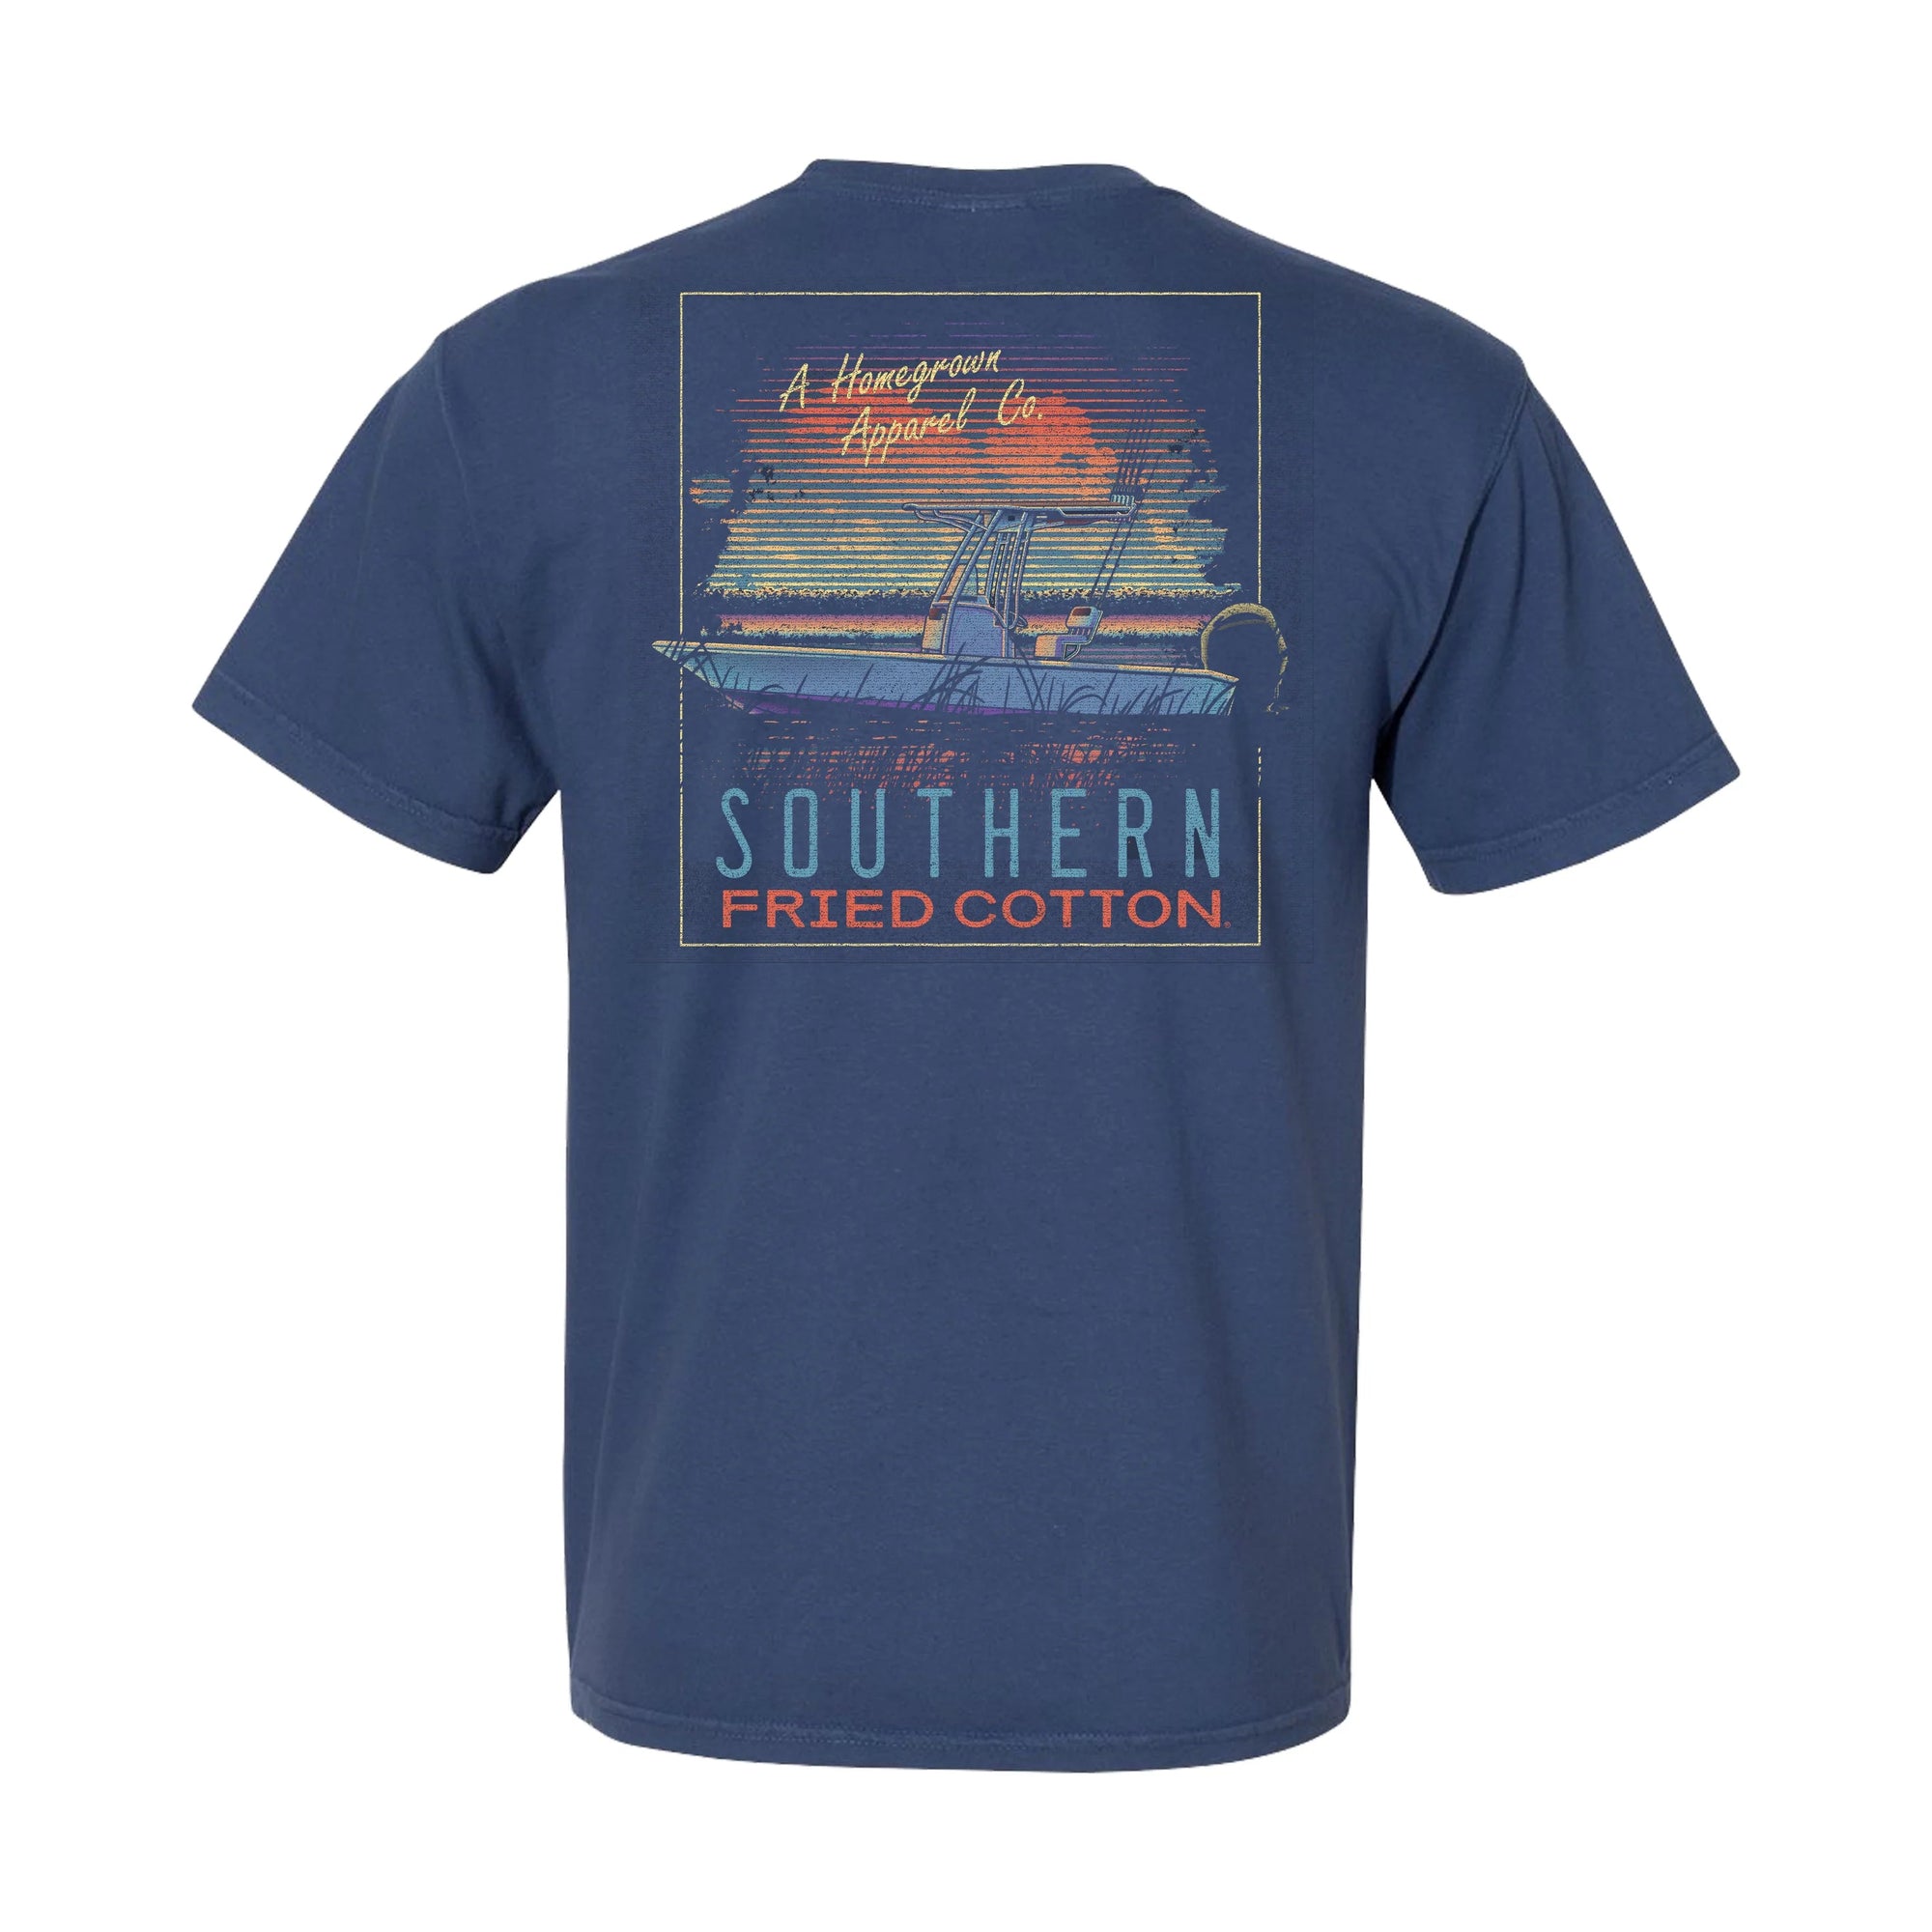 SOUTHERN FRIED COTTON Men's Tees Southern Fried Cotton Catch This Tee || David's Clothing